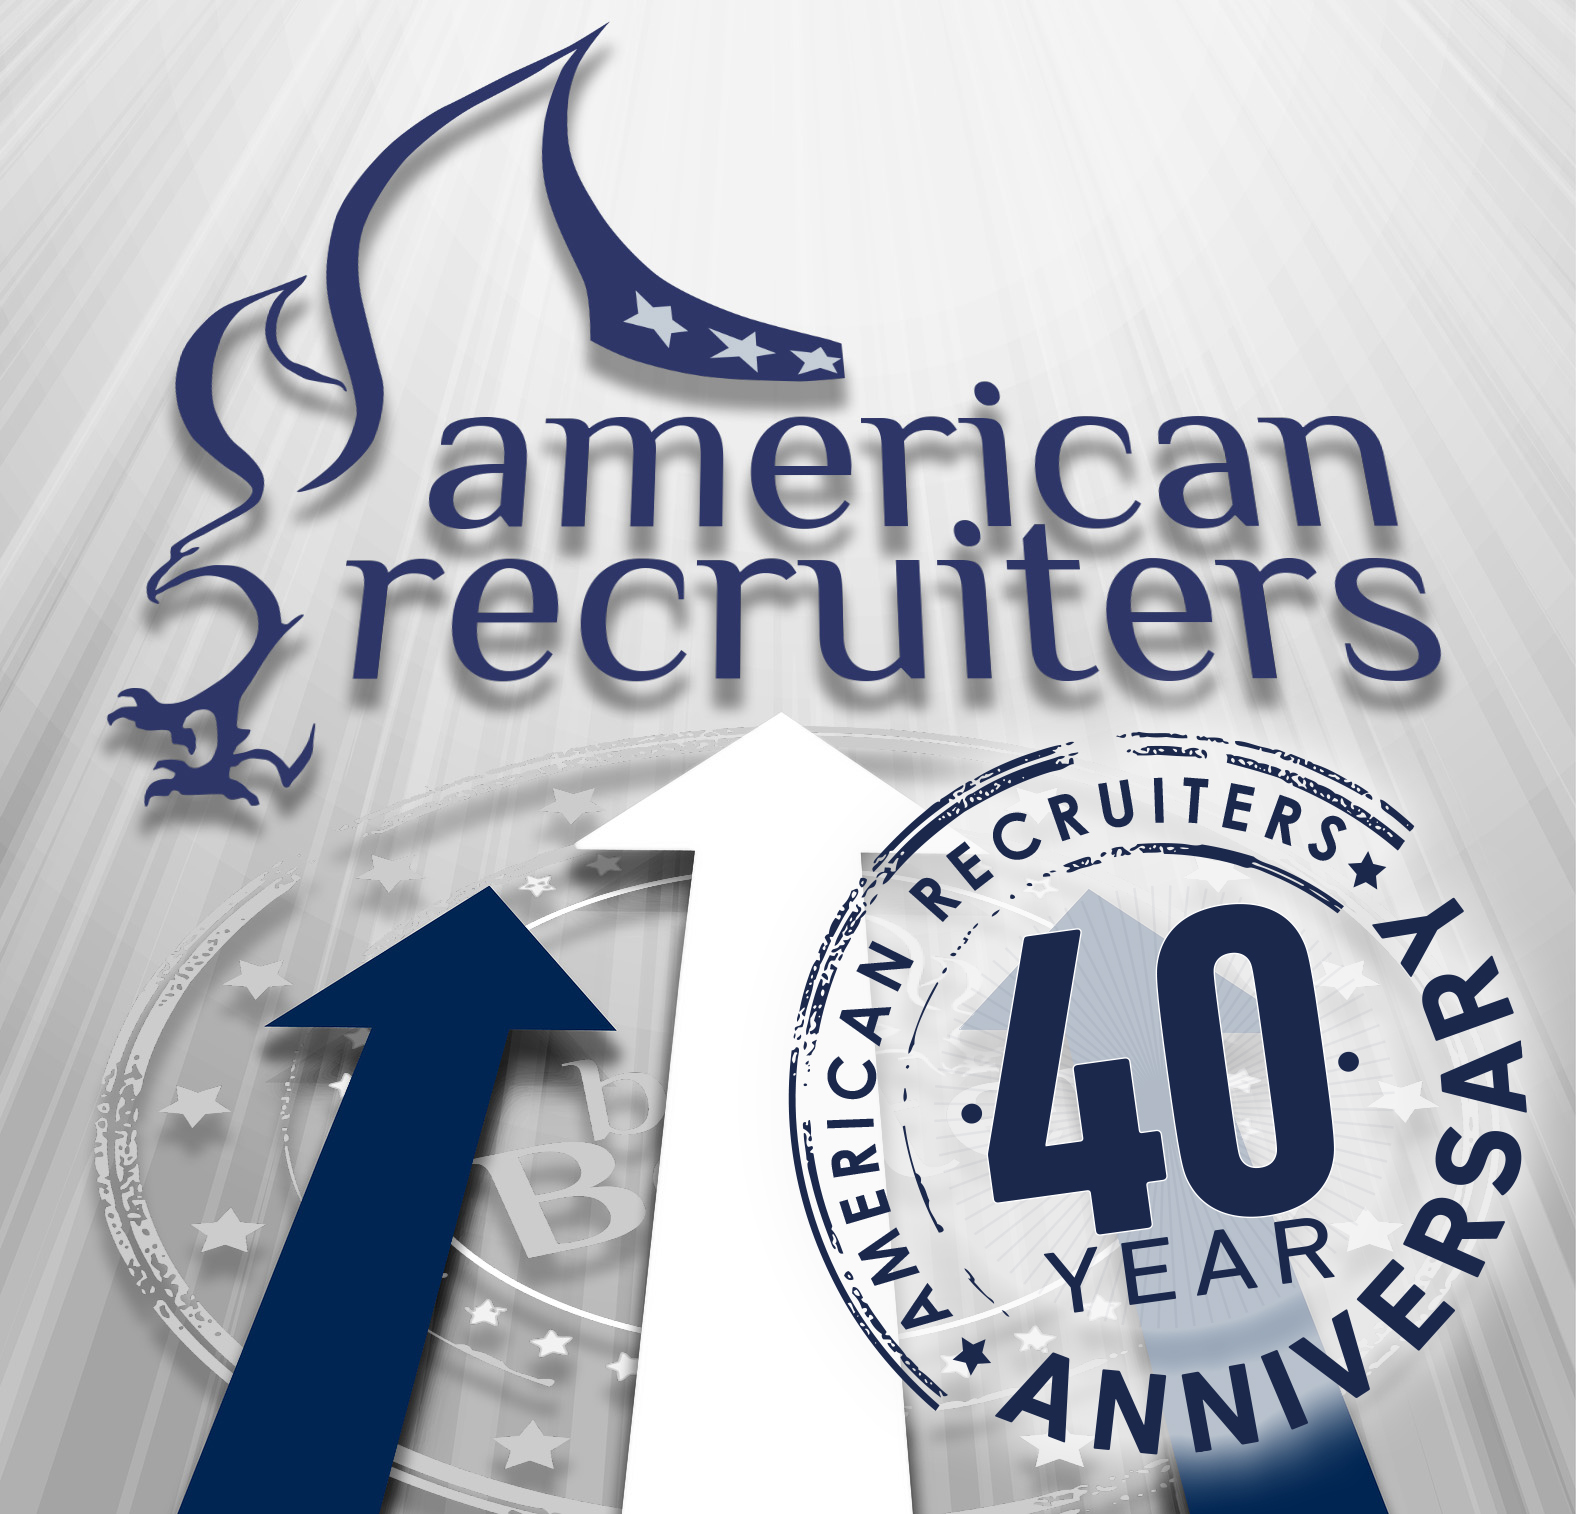 American Recruiters Executive Staffing and Recruiting